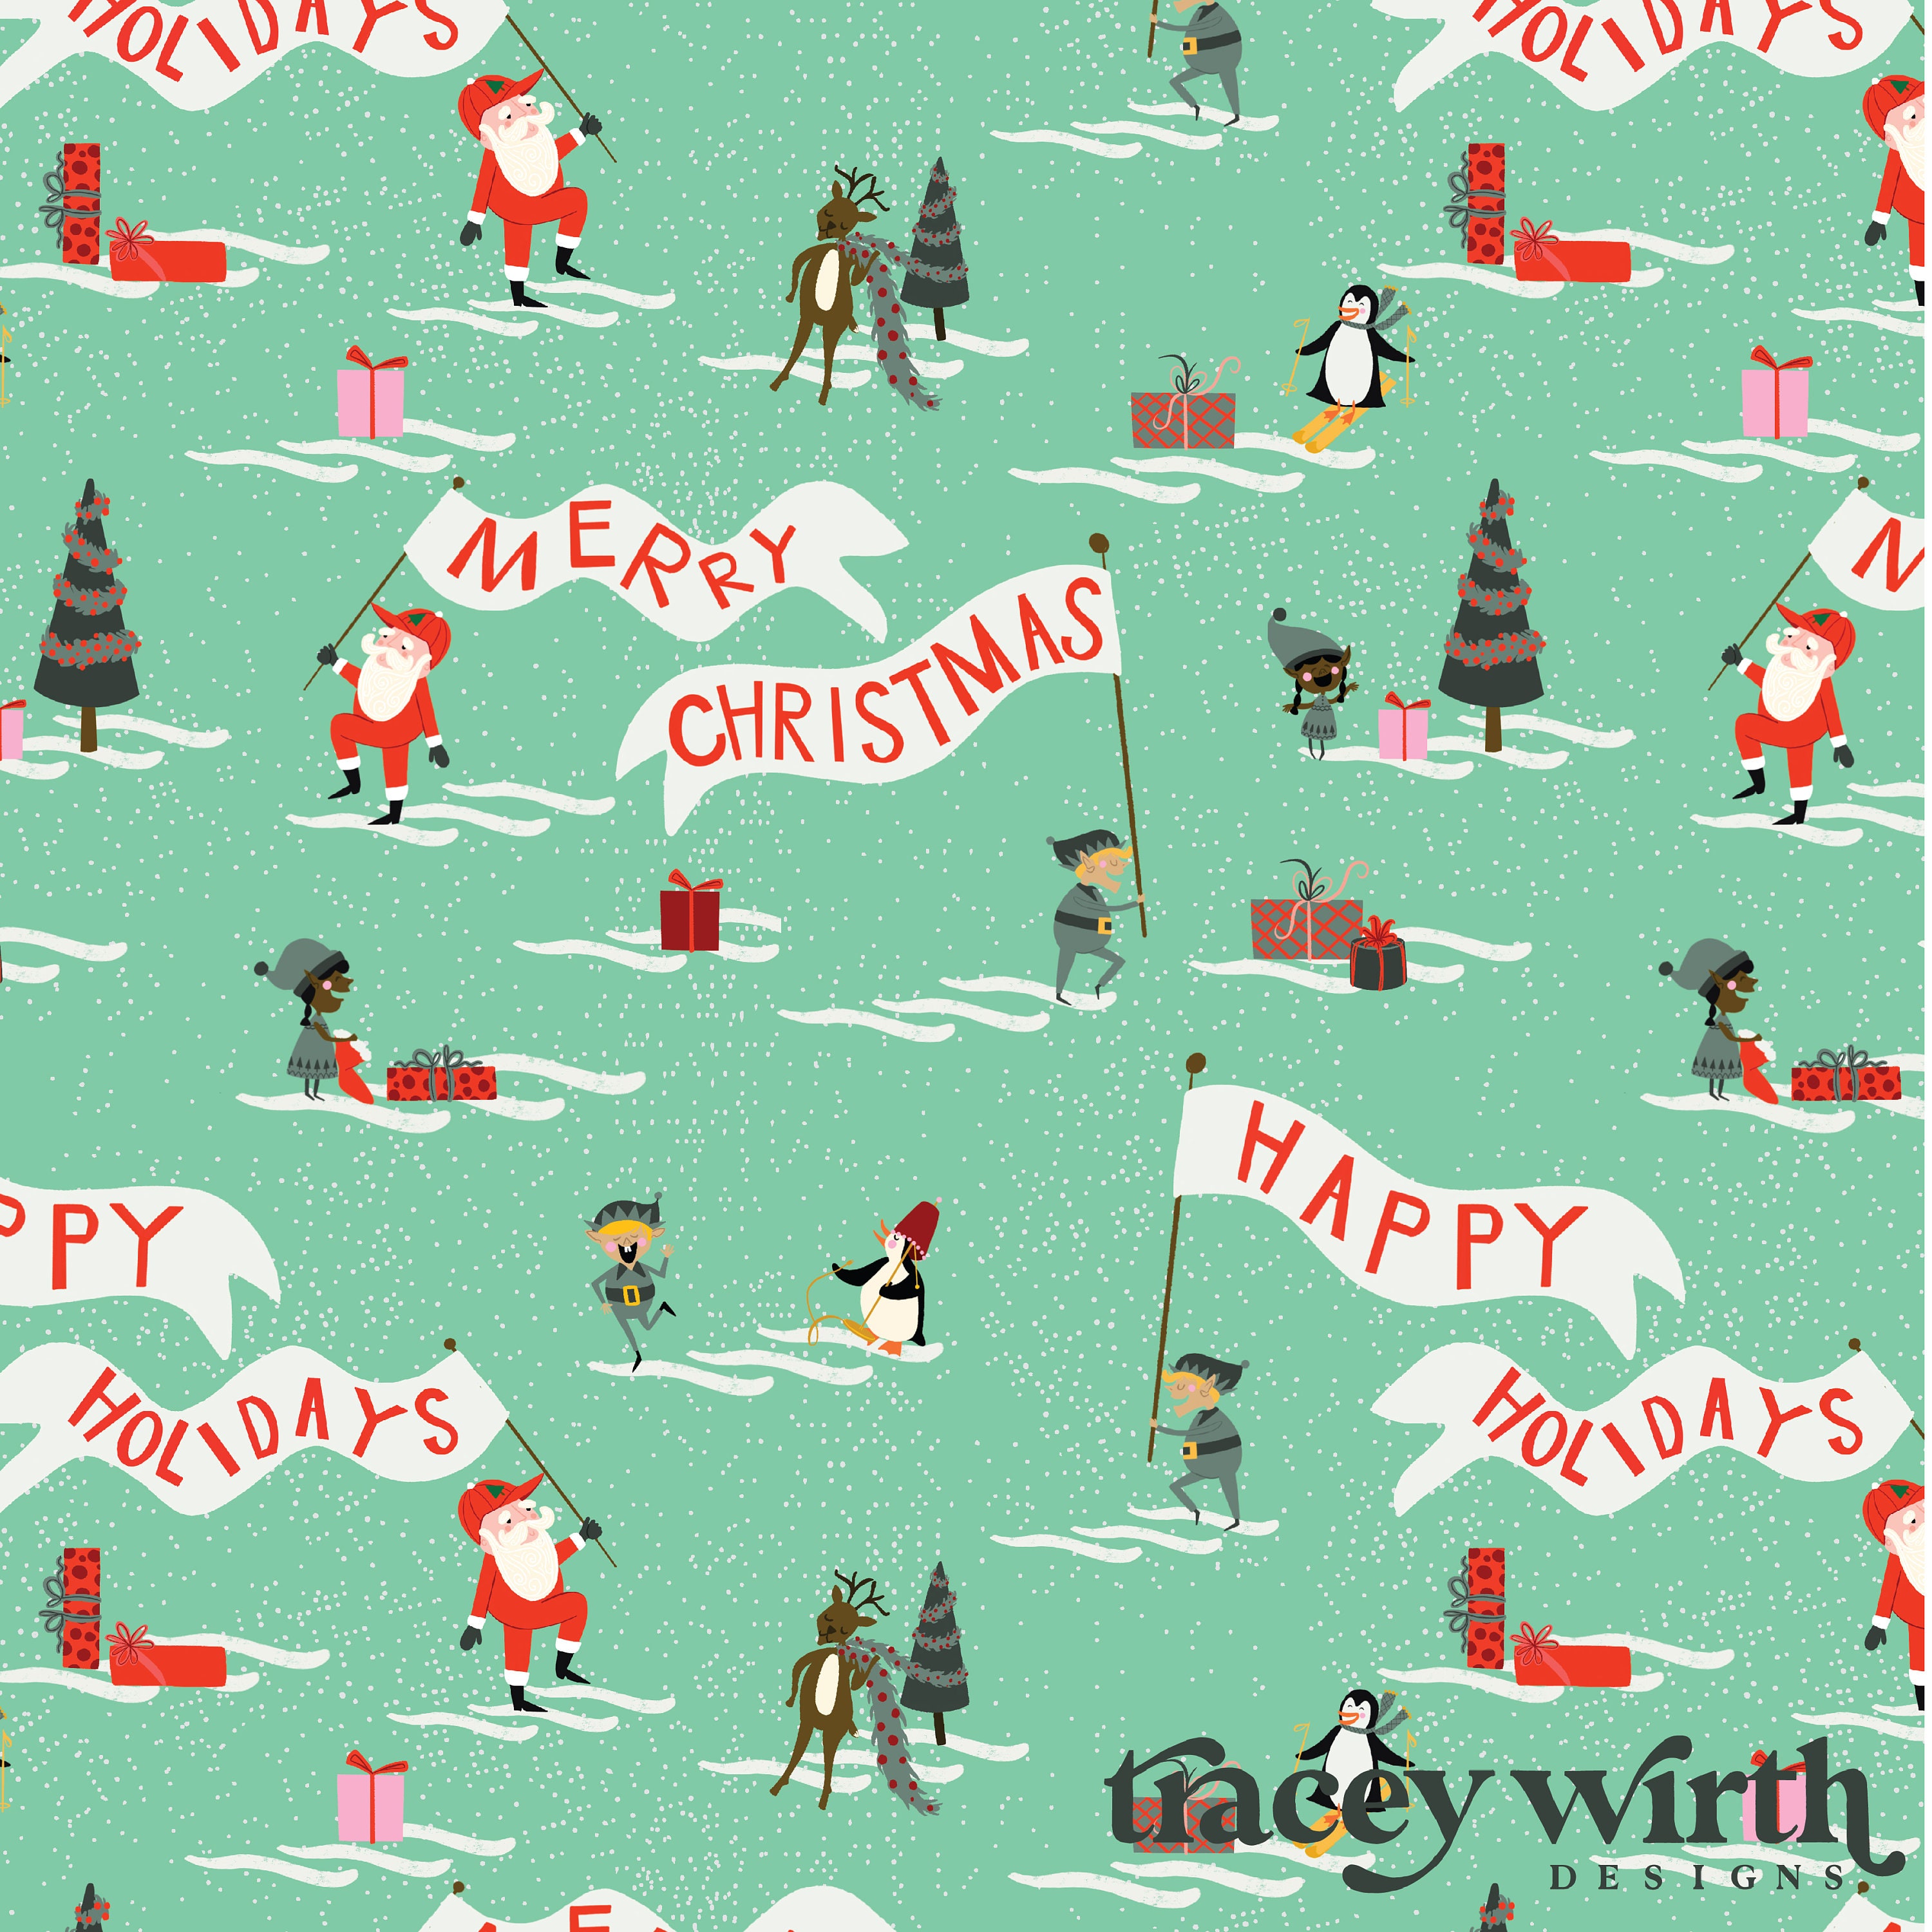 Festive Christmas Wrapping Paper W/ Double Adhesive Tape, Rope